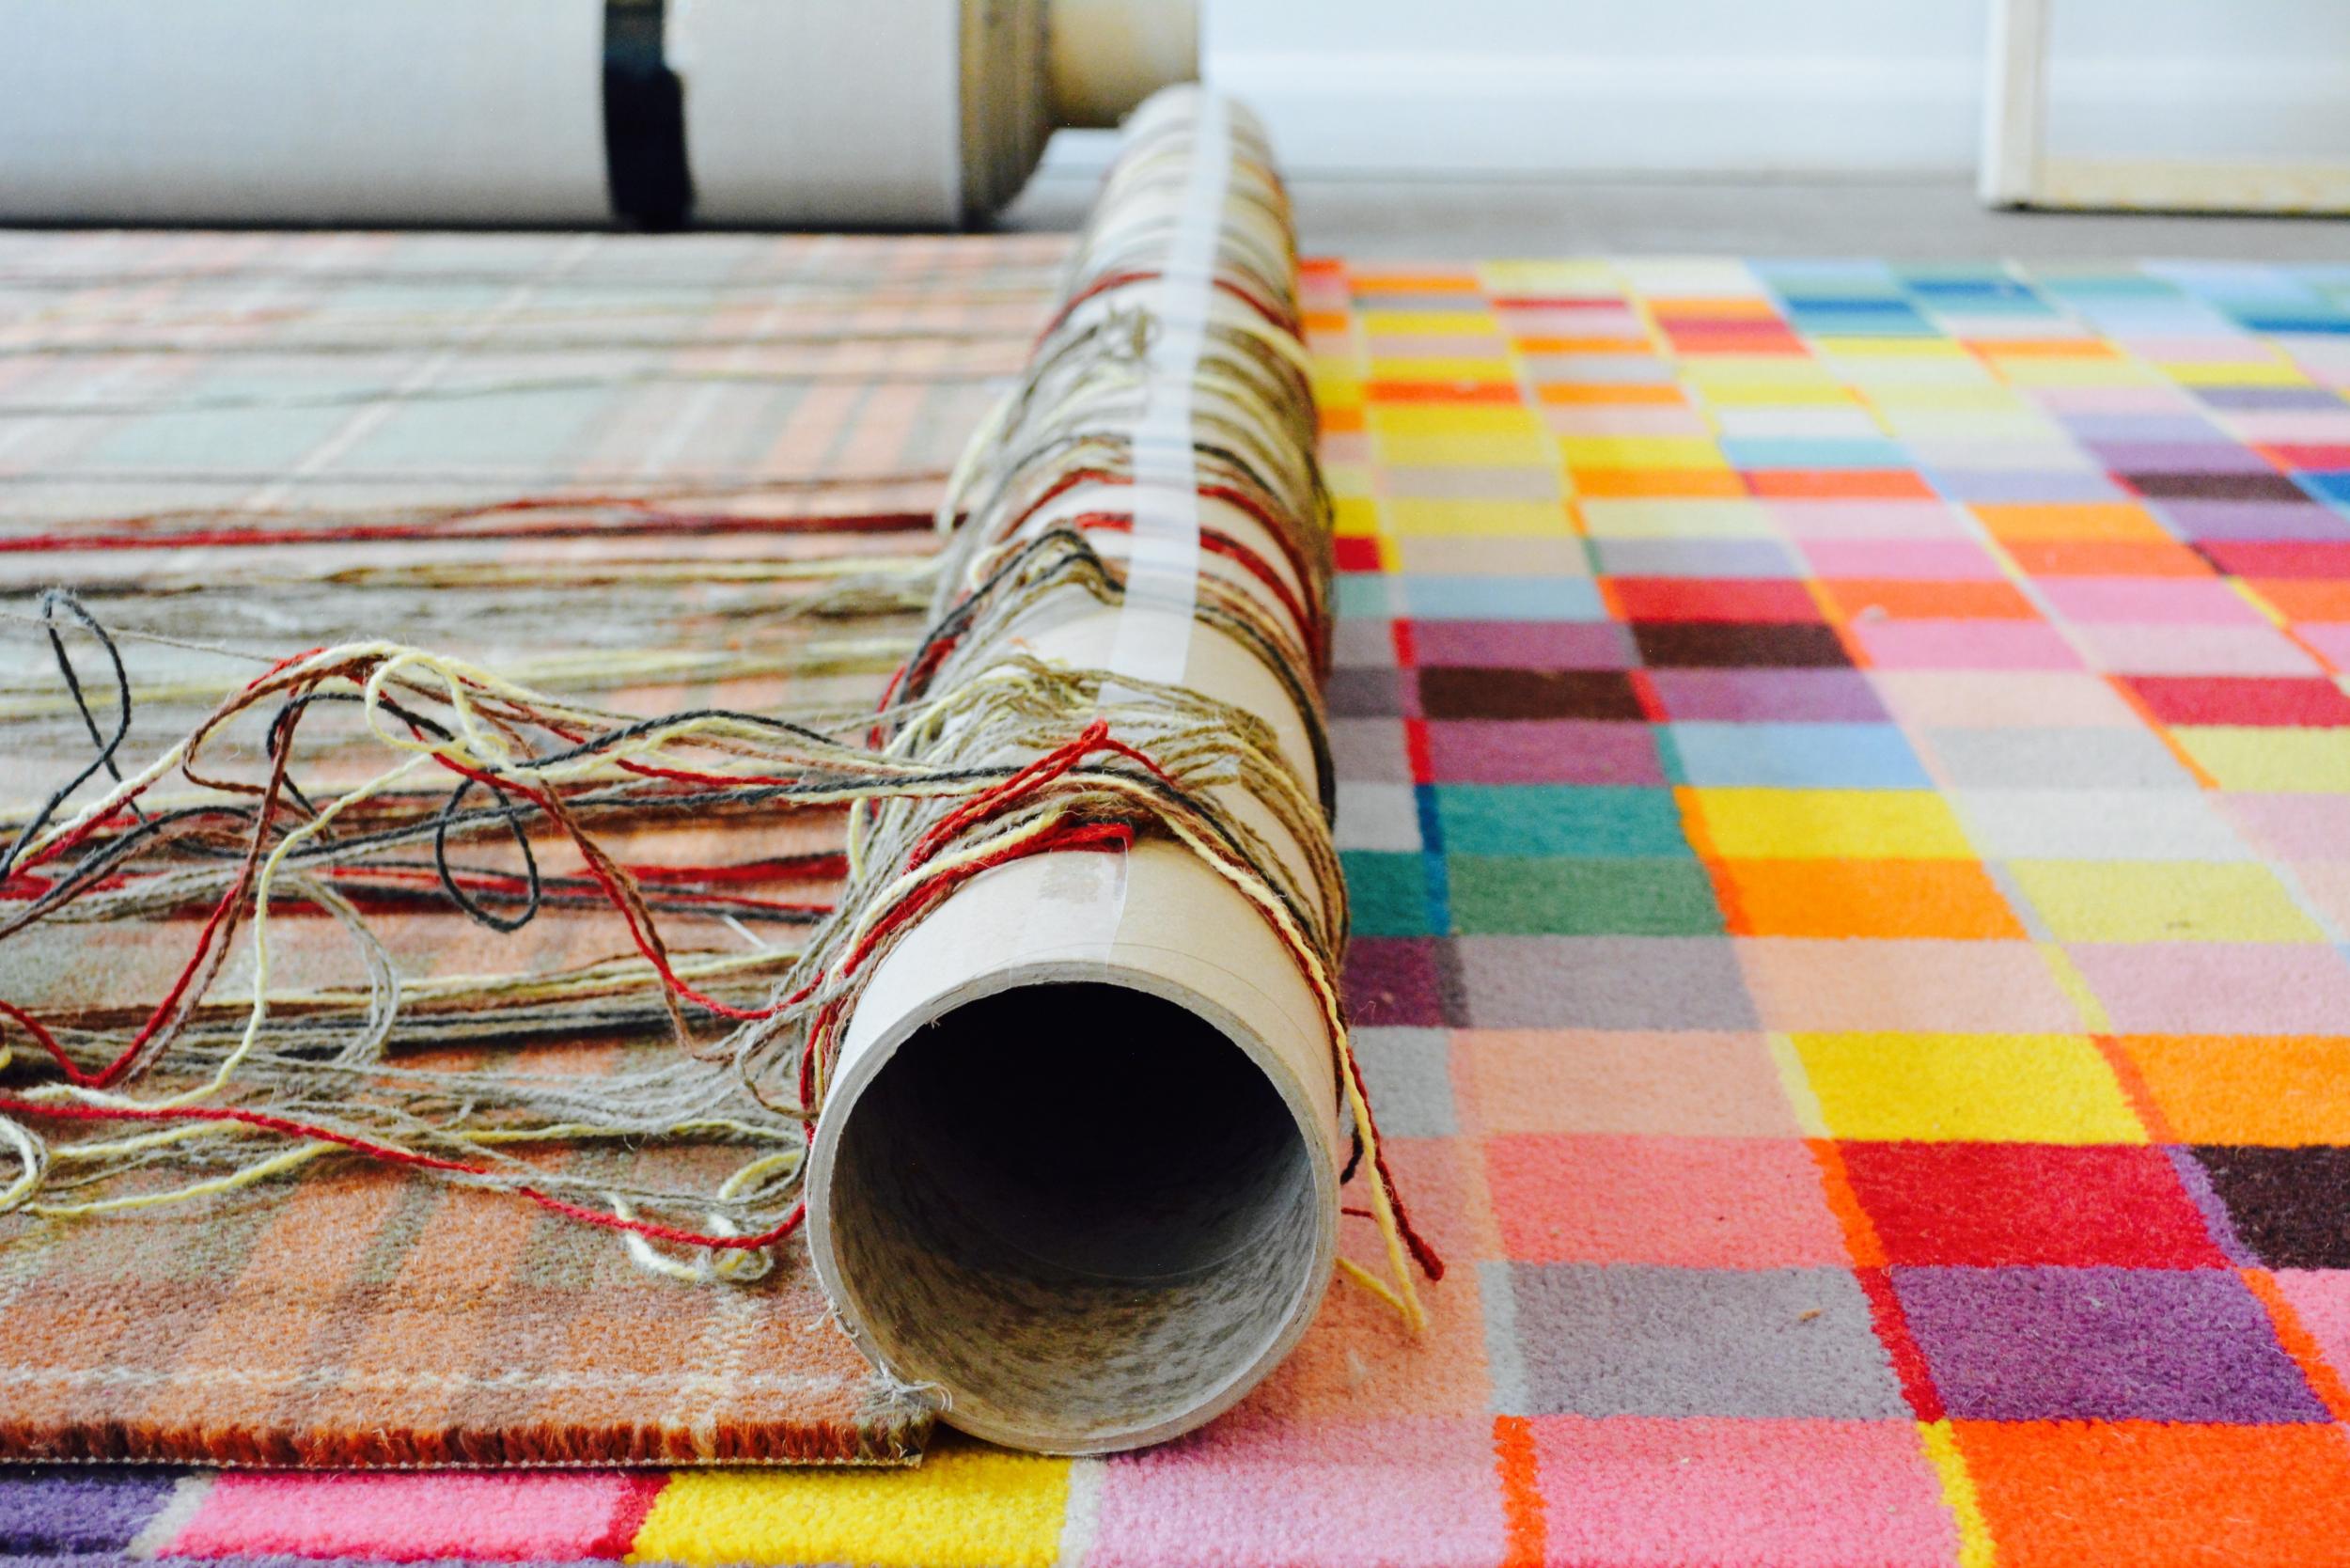 Brintons is the world's leading manufacturer of high-quality woven carpets